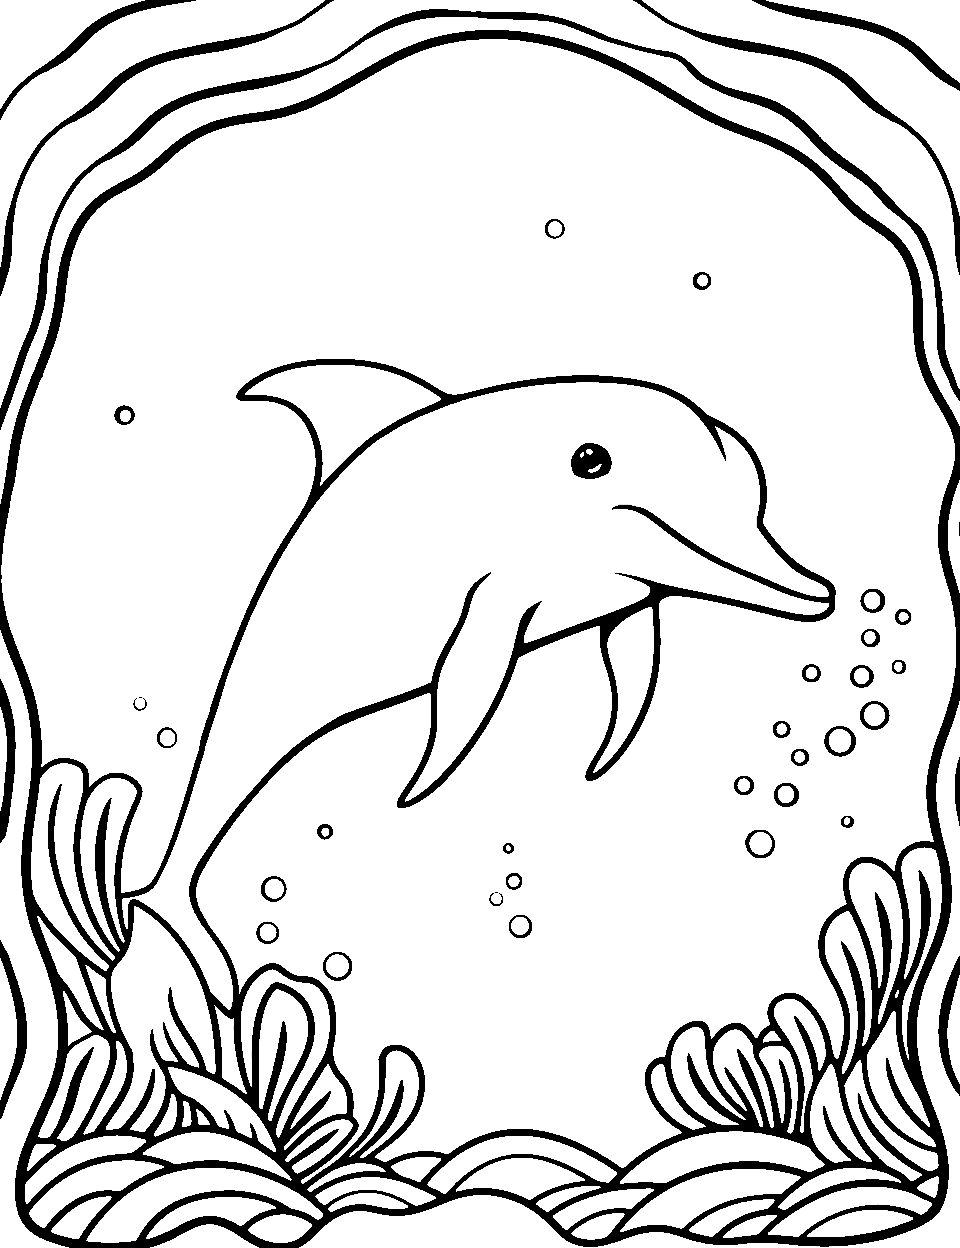 Dolphin Under the Sea Arch Coloring Page - A single dolphin swimming under a naturally formed sea arch providing a tranquil underwater view.